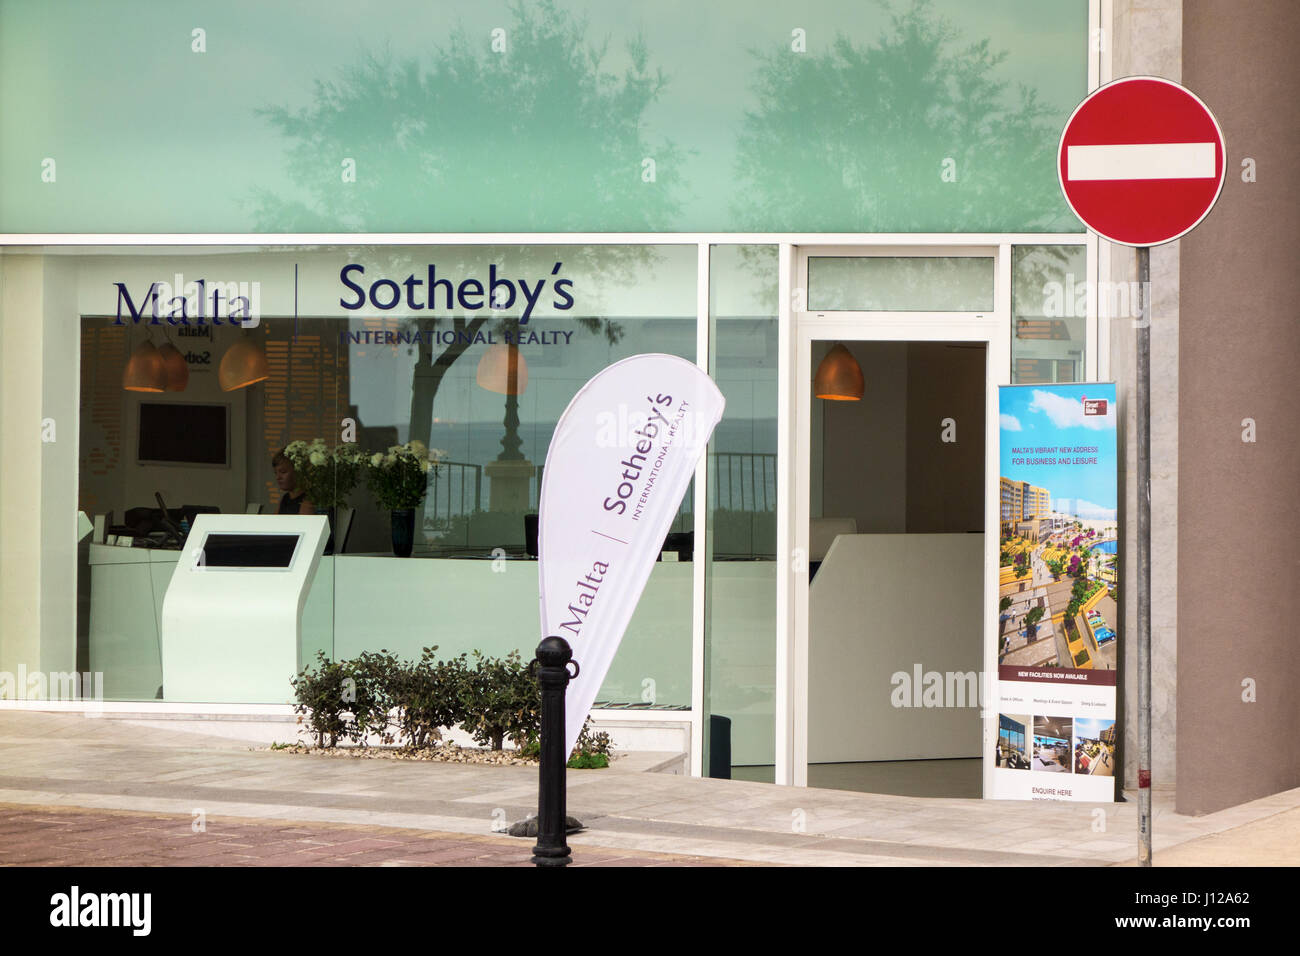 Sotheby's shop front Malta branch. Stock Photo